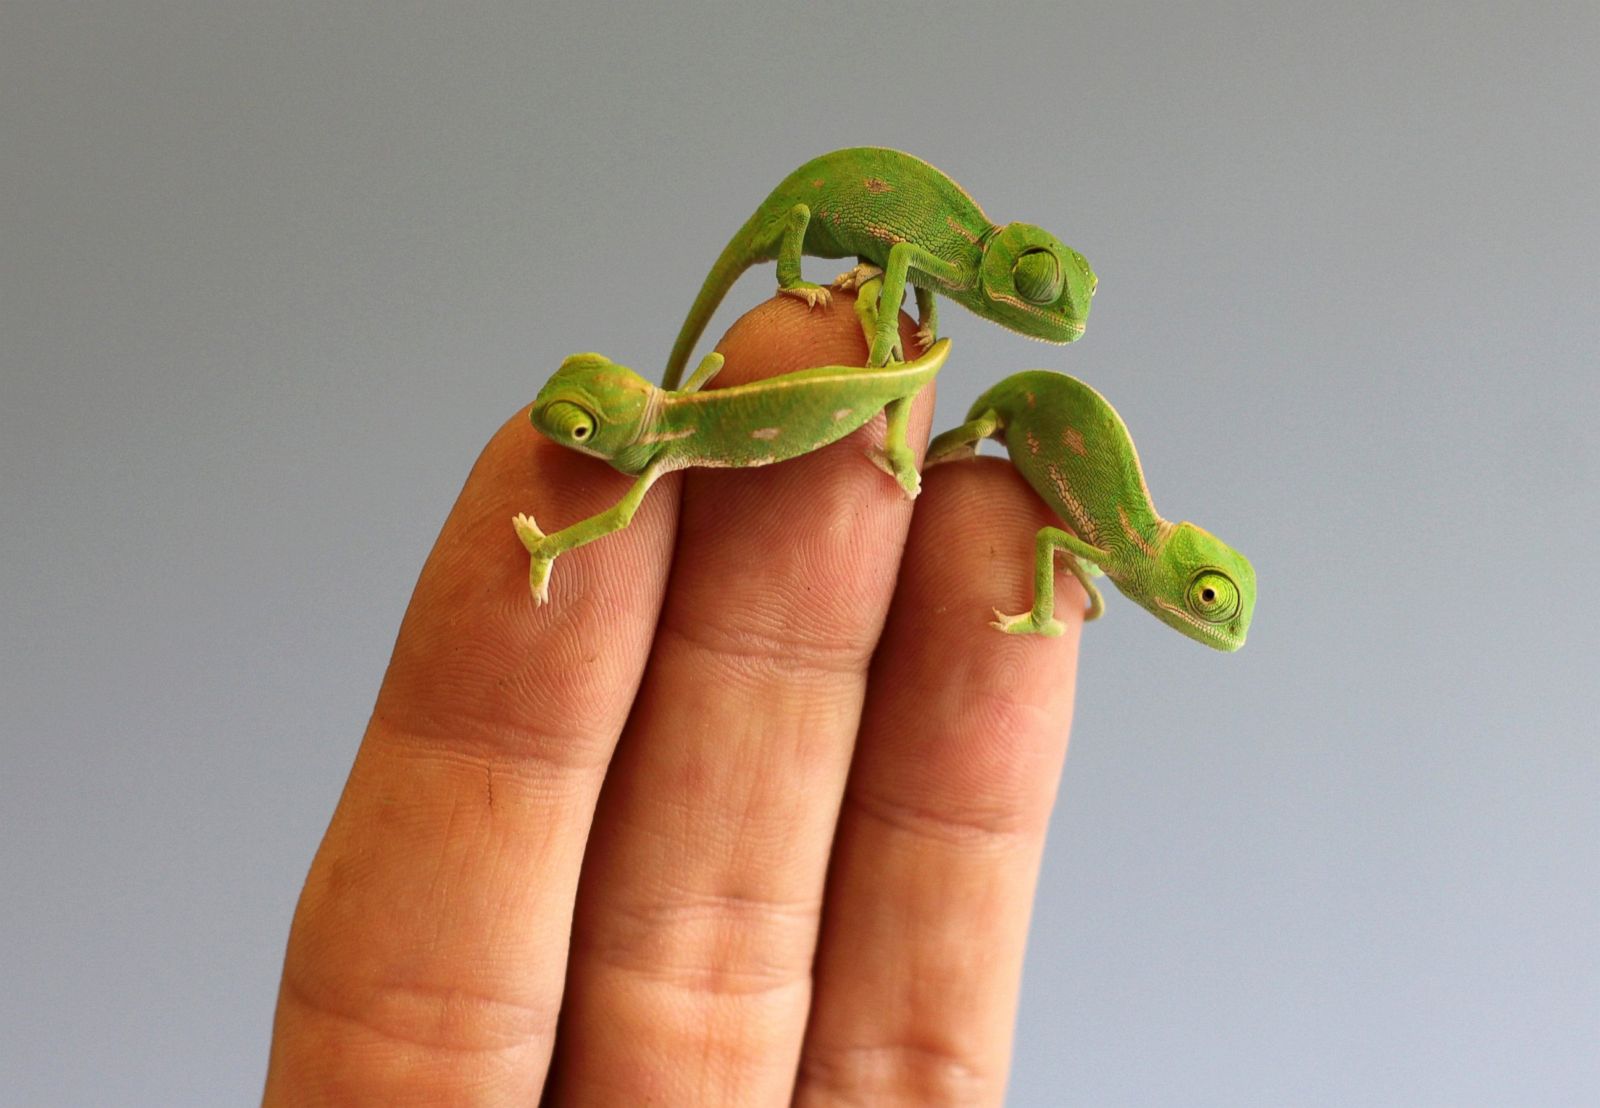 Baby Chameleons as Tiny as Your Fingertips Picture | Cutest baby